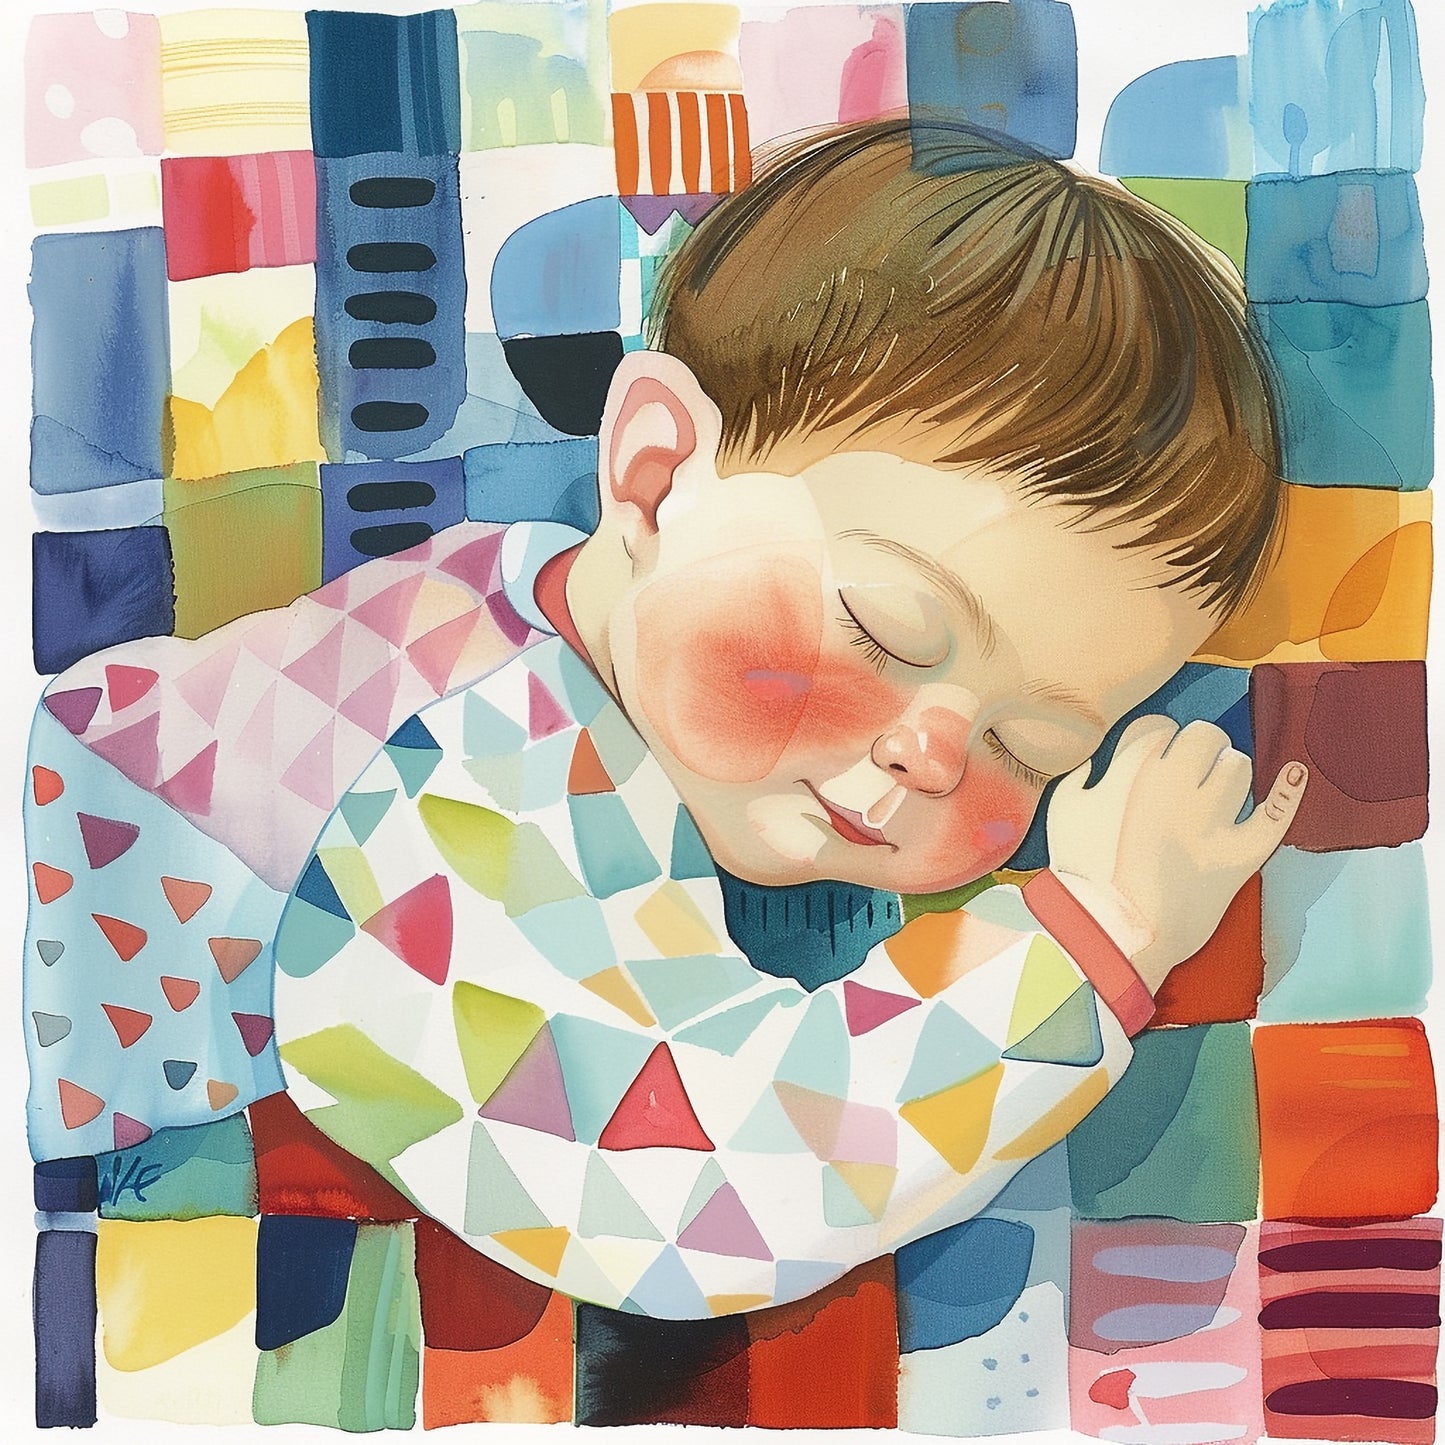 Colorful Abstract Painting of a Peacefully Sleeping Child